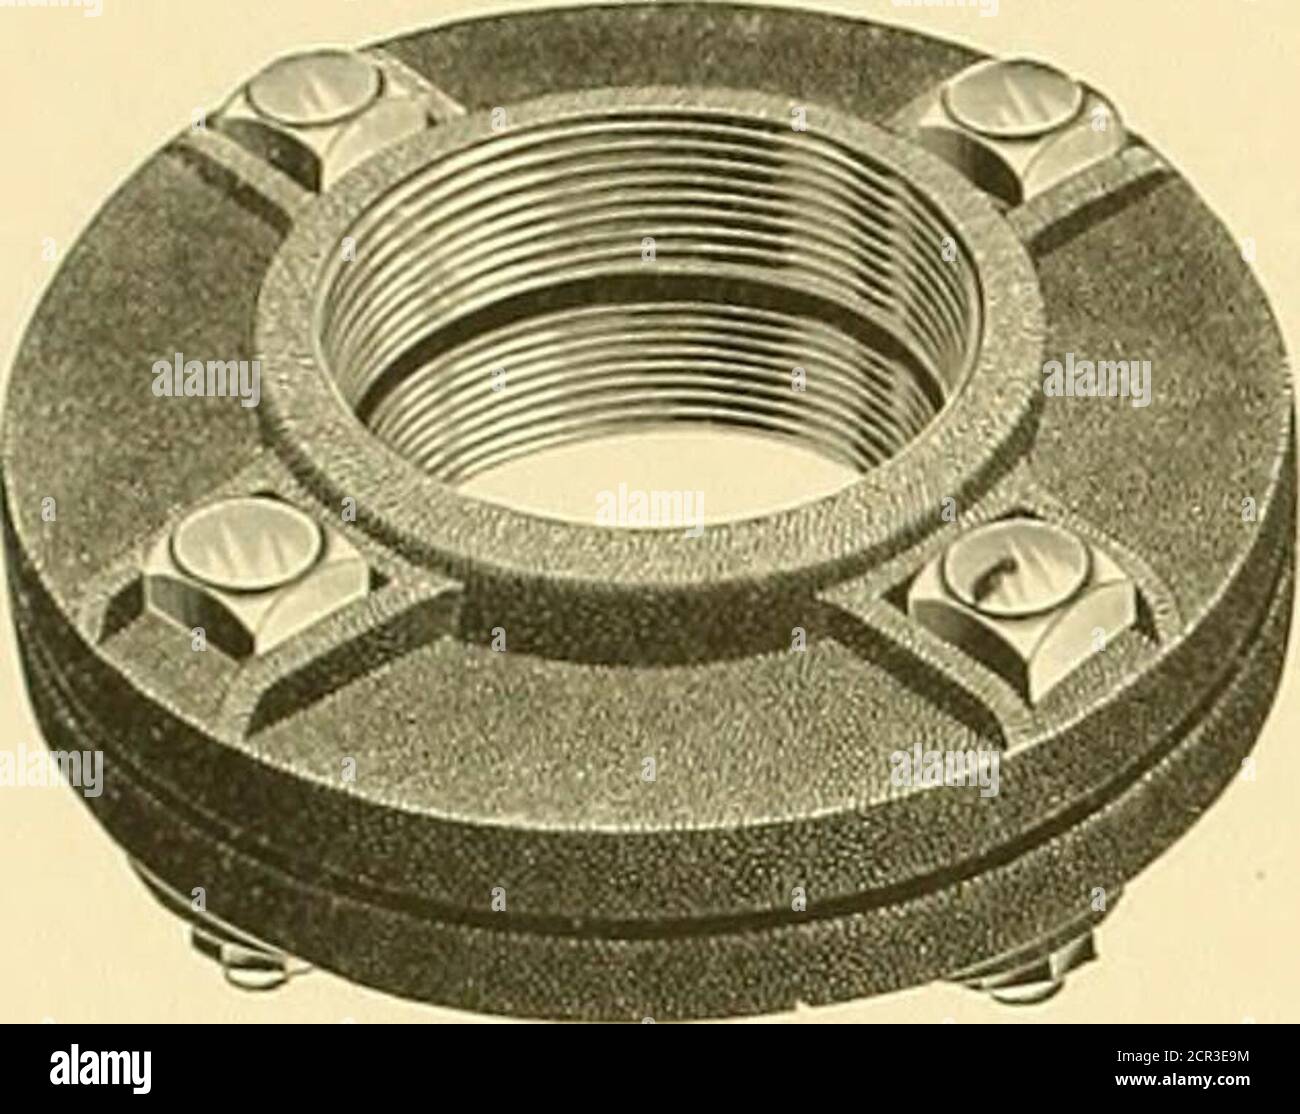 . Illustrated catalogue of James B. Clow & son, manufacturers of and dealers in supplies for plumbers, steam and gas fitters, water and gas works, railroads and contractors .. . FIG. 68. COMMON FLANGE. FIG. 69. CURVED FLANGE. FLANGES-F gs. 68 an( i 69. SIZE OF PIPE, INCHES f i i 1 li H 2 n 3 3i 4 ^ 5 6 7 8 9 10 12 Diameter Flange,Inches. 3 u 4 4+ 5 oi 6 81 8i 9 941011121314151617181920 .14 .17 -- .18.21 .33 .22.33.52 .25.35.52 .31.36 .52 .45.55.65 .75 .90 .55.65 .75 .90 .65 .75.84.96 l.22 1.001.131.26 1.75 1.041.221.40 1.76 1.551.701.902.32 2.002.402.80 2.402.803.203.453.75 3.754.10 4.505.00 4 Stock Photo